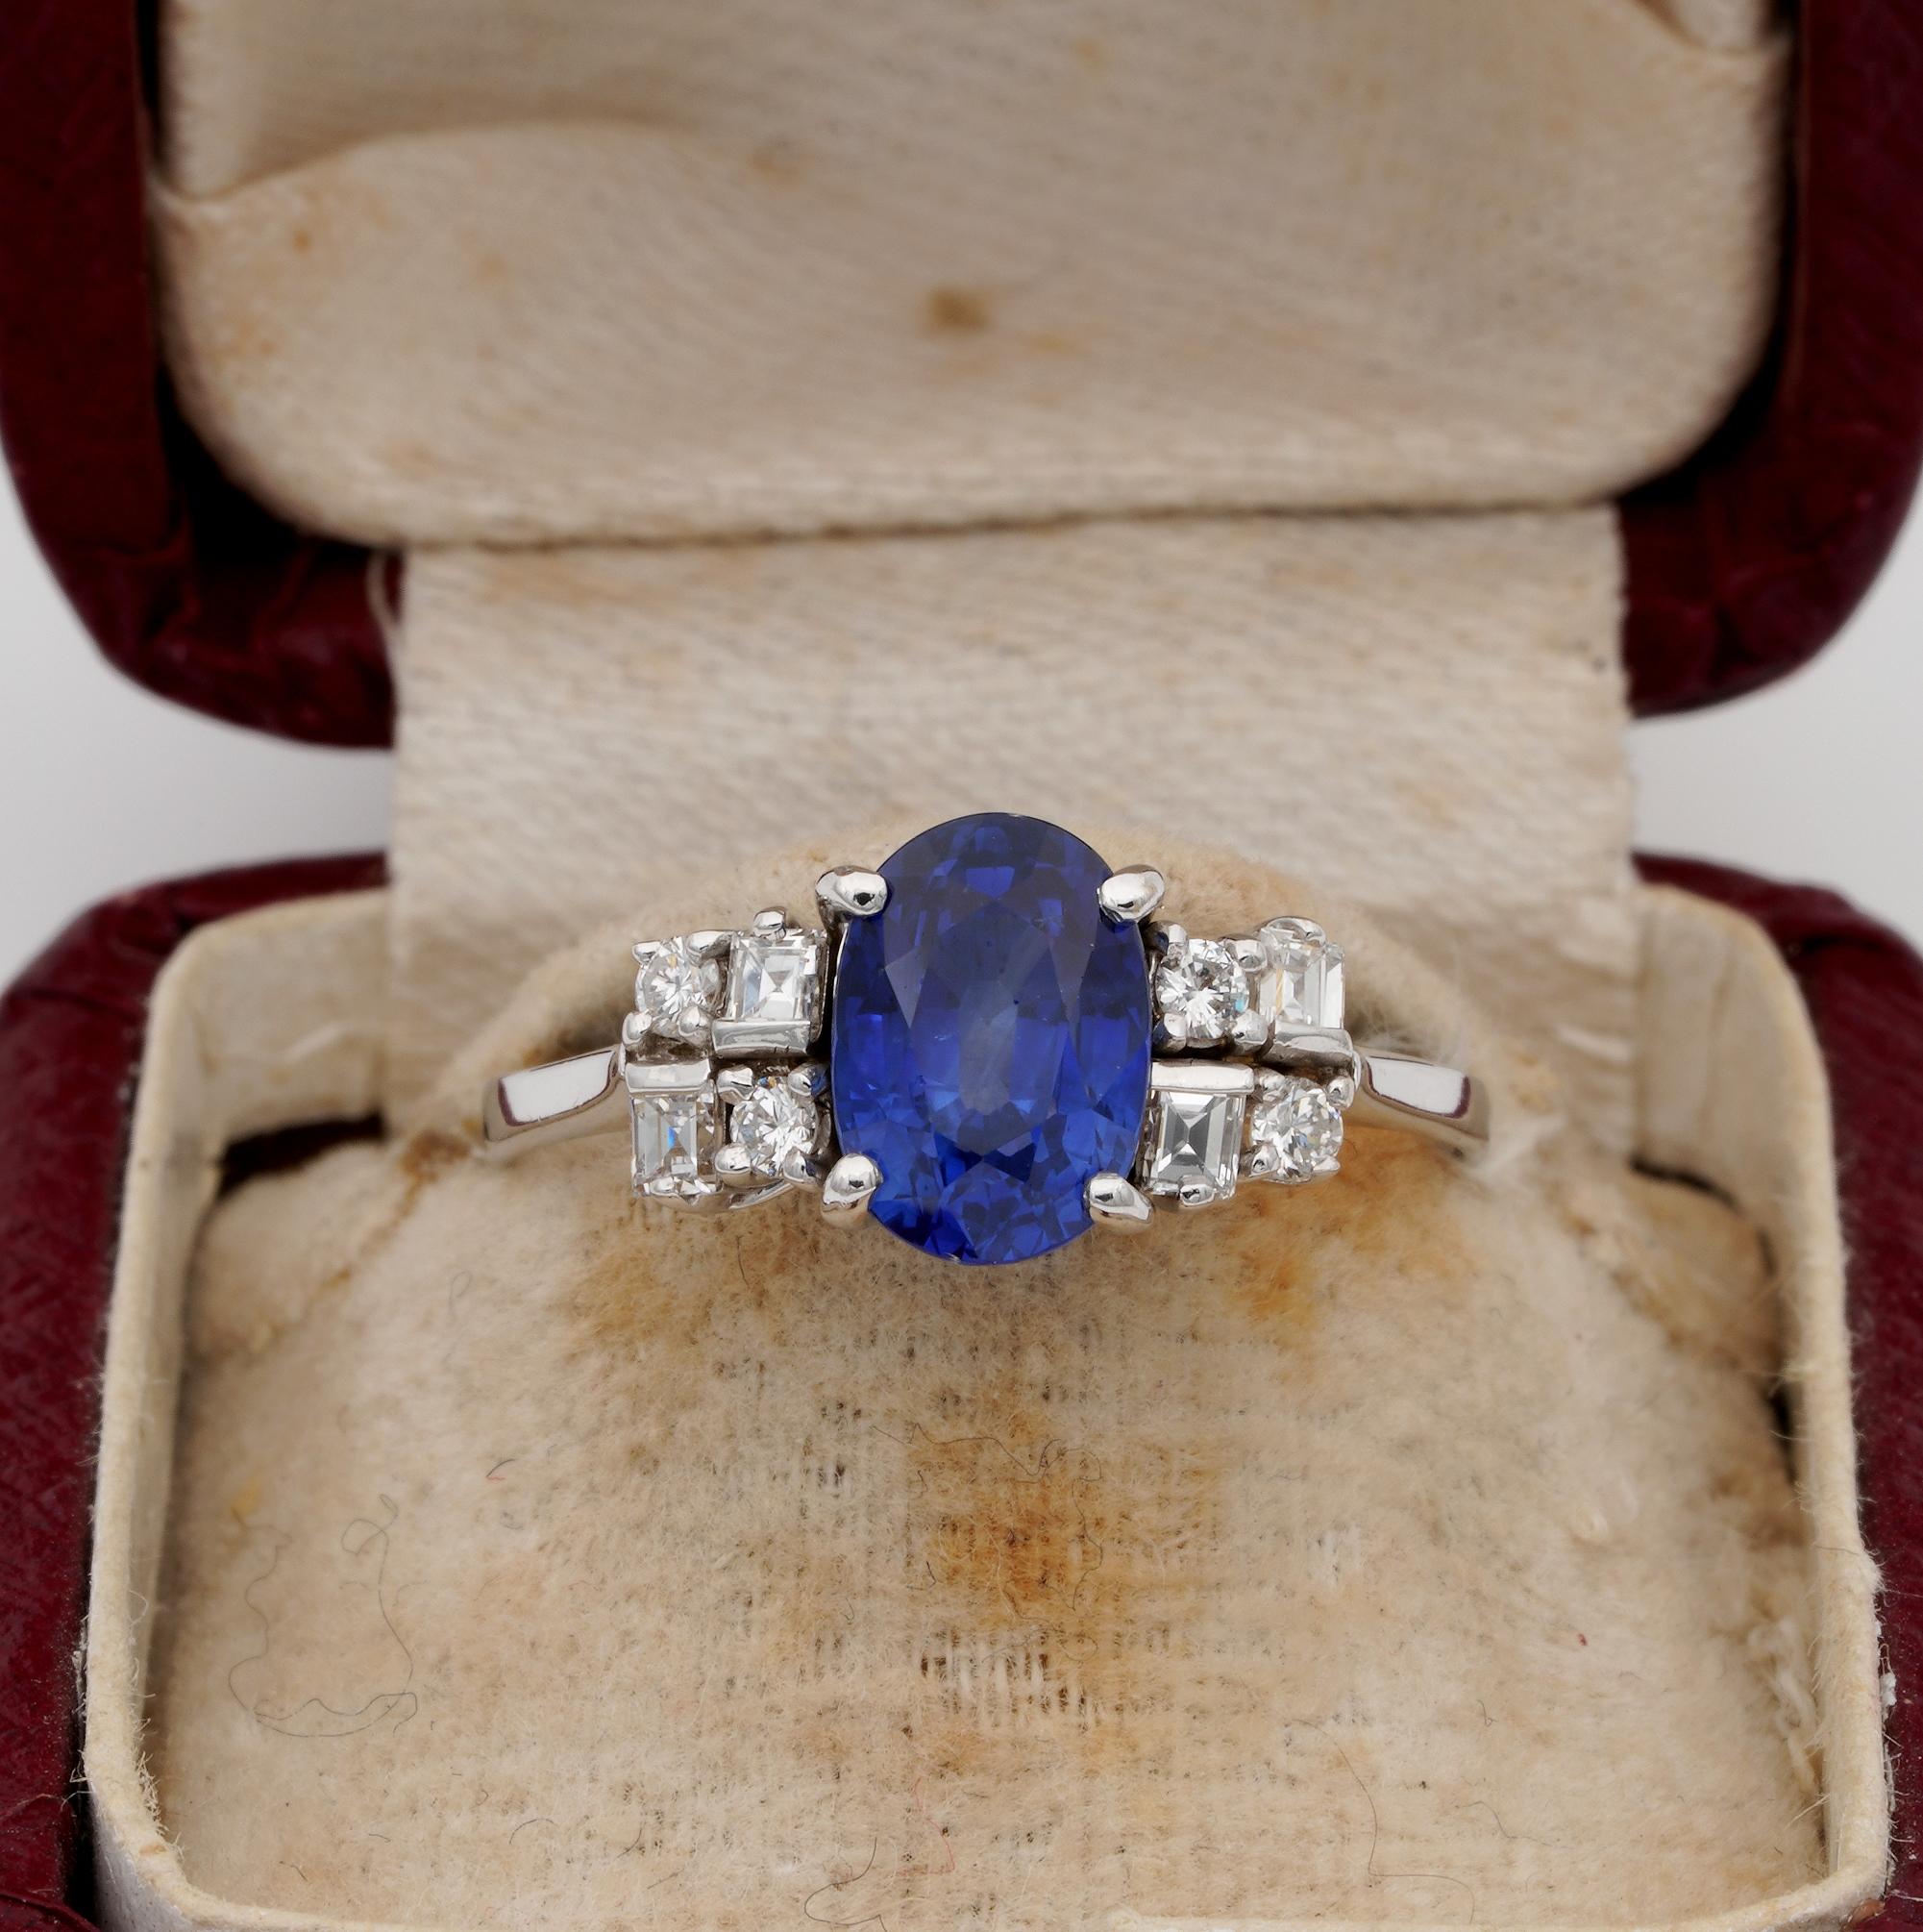 Vivacious Blue!

Superb in colour Natural 2.10 Ct Ceylon origin Sapphire makes the star of this gorgeous vintage ring
Intense vibrant Royal Blue hue as pictured, great in size, beautifully mounted, minimal internal inclusions
Sapphire is oval